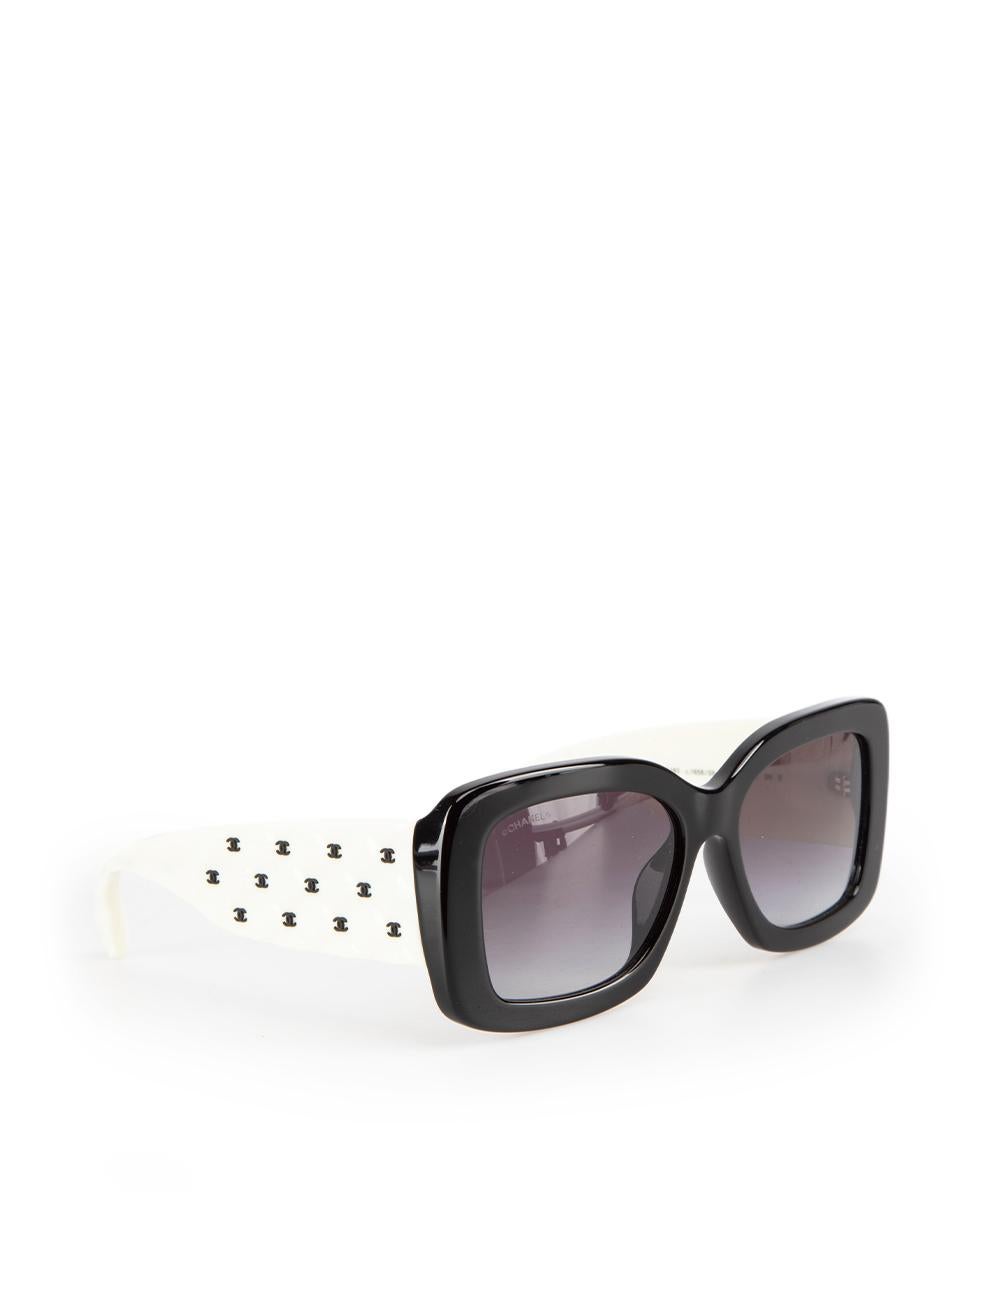 Chanel Black & White Quilted Arms Square Sunglasses In New Condition For Sale In London, GB